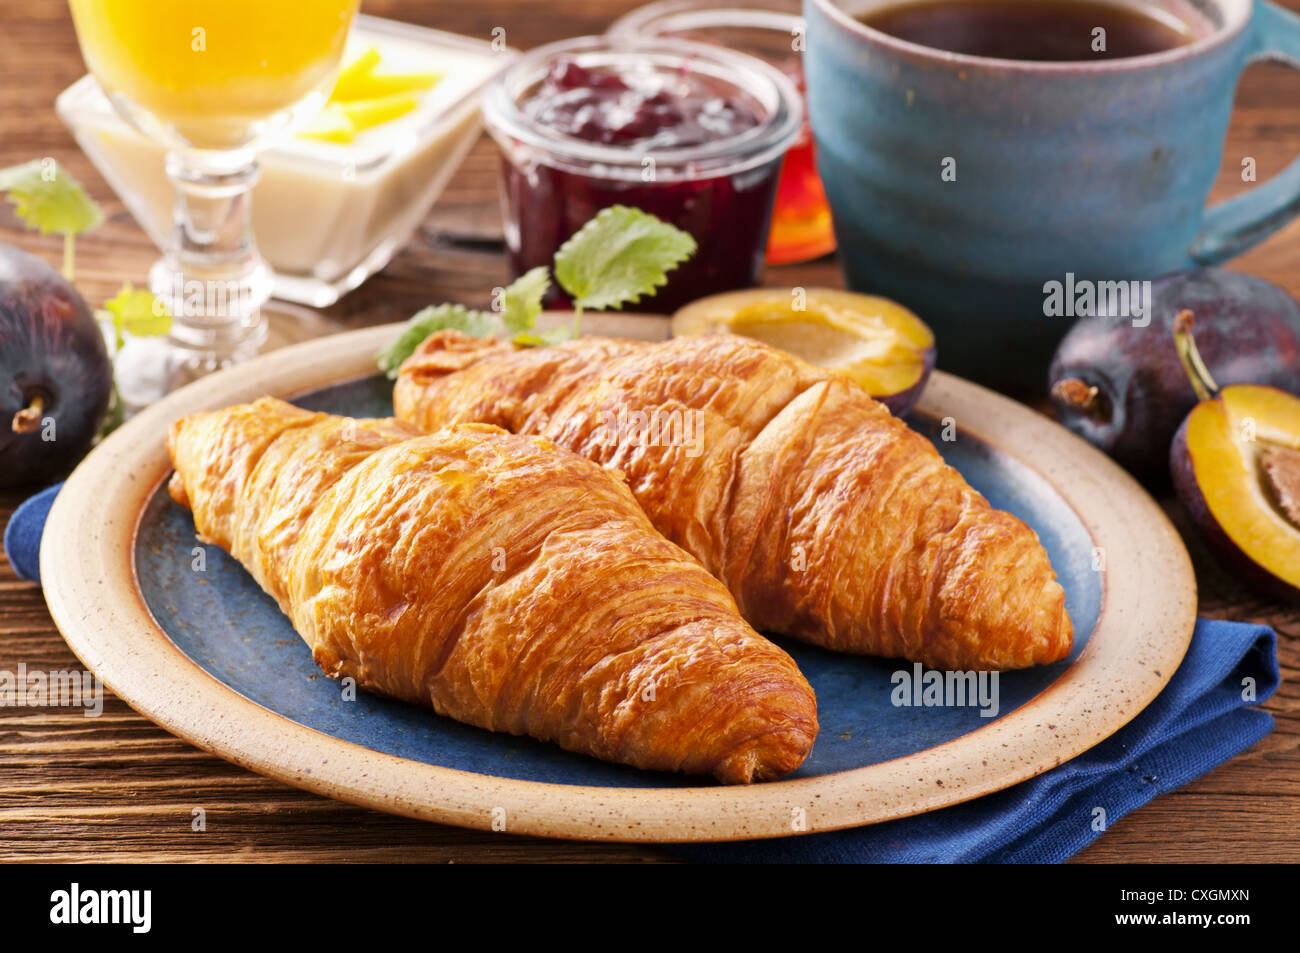 Breakfast with croissants and marmalade Stock Photo - Alamy